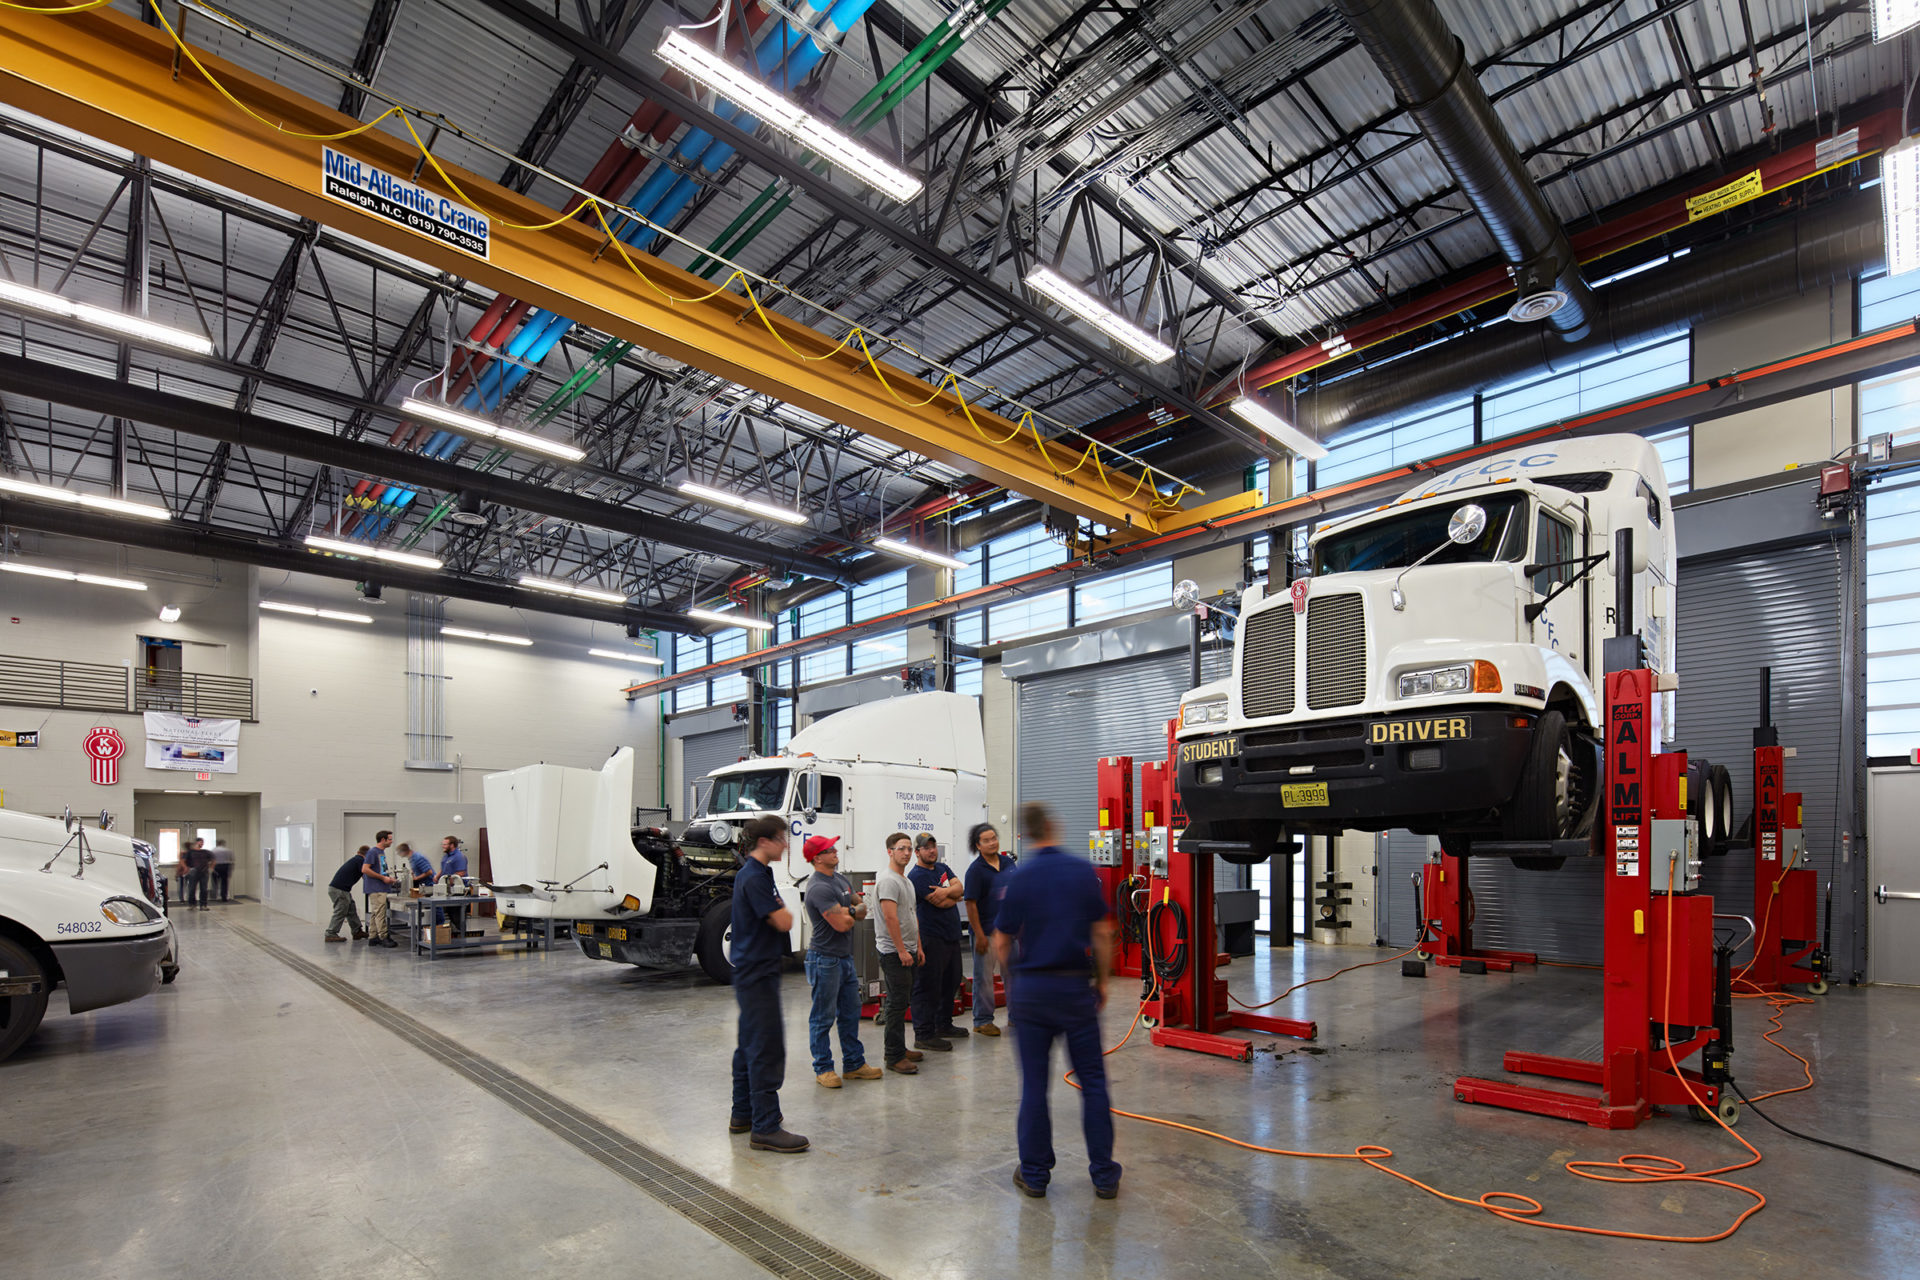 Truck bay at the Heavy Equipment and Transport Technology Building (HEATT) at Cape Fear Community College in Castle Hayne, NC; Architect: Clark Nexsen